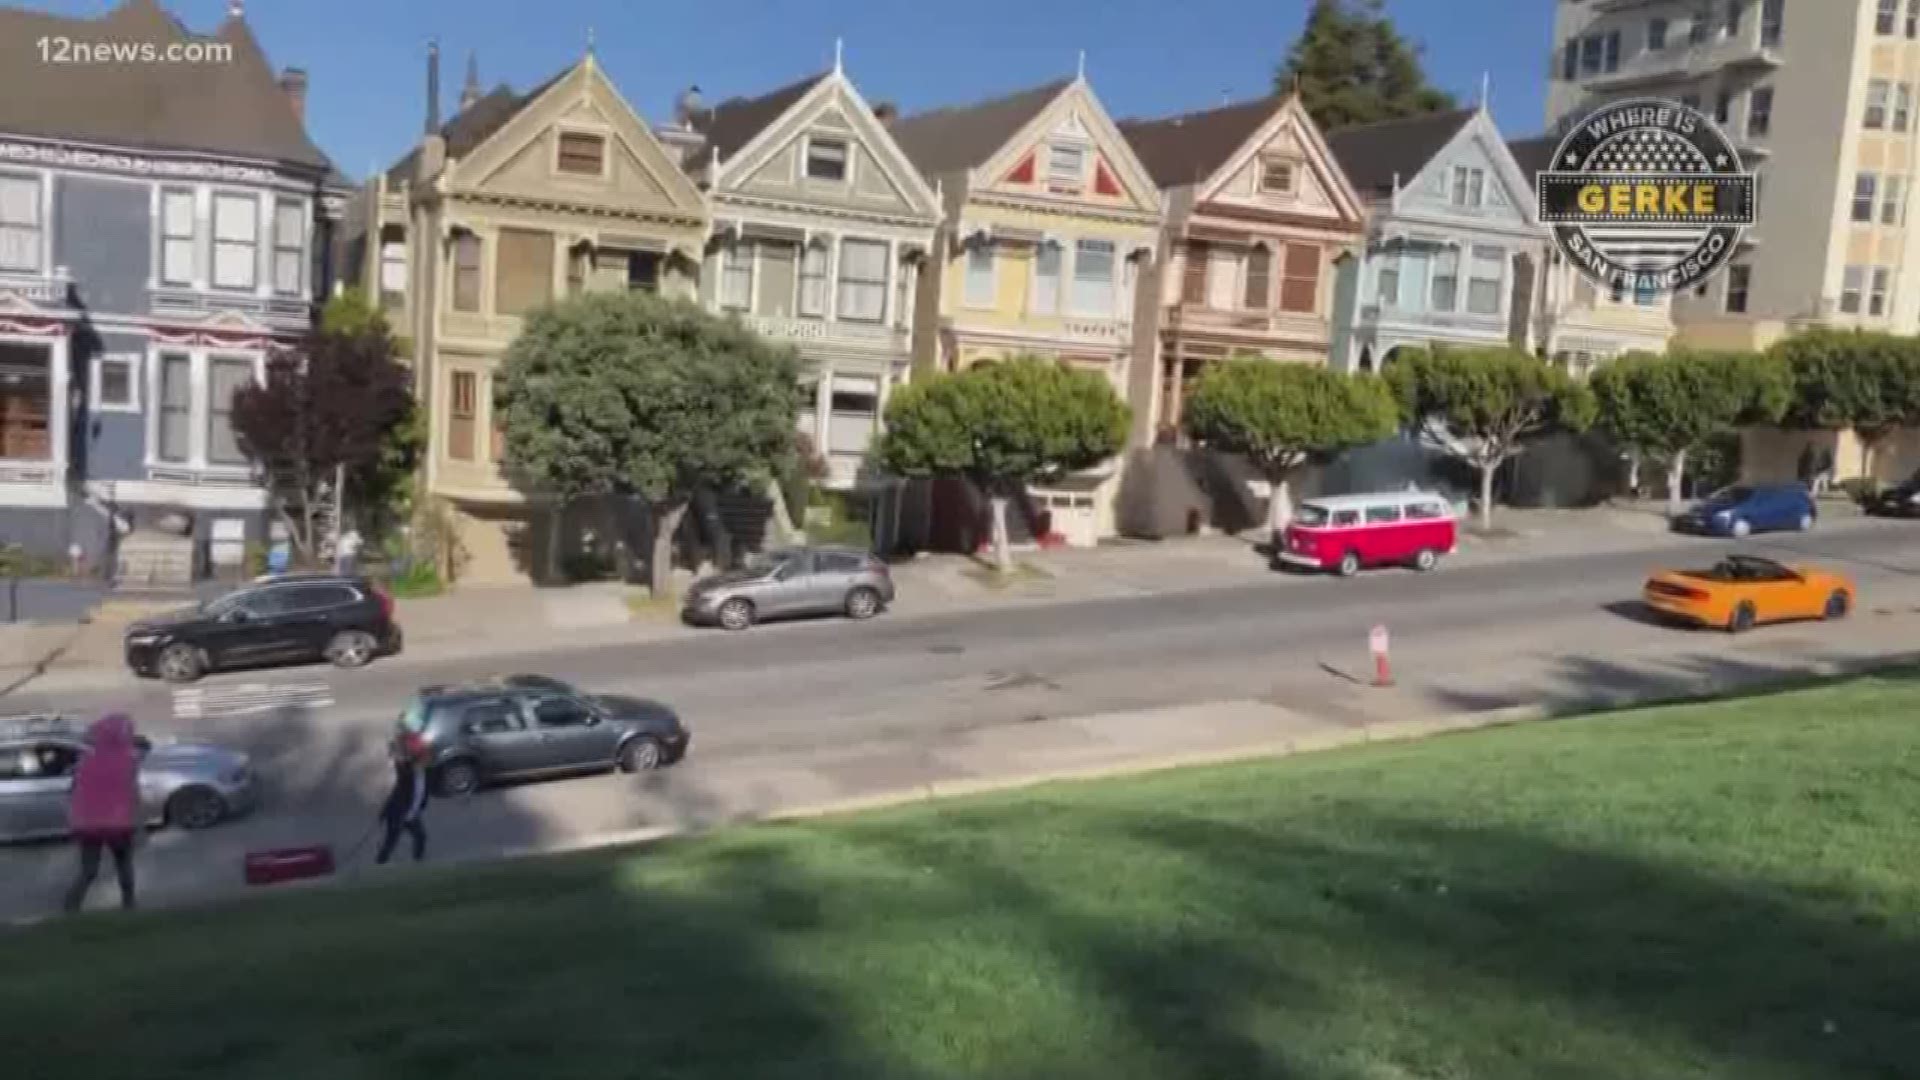 We take a look at the "Painted Ladies" houses in San Francisco.